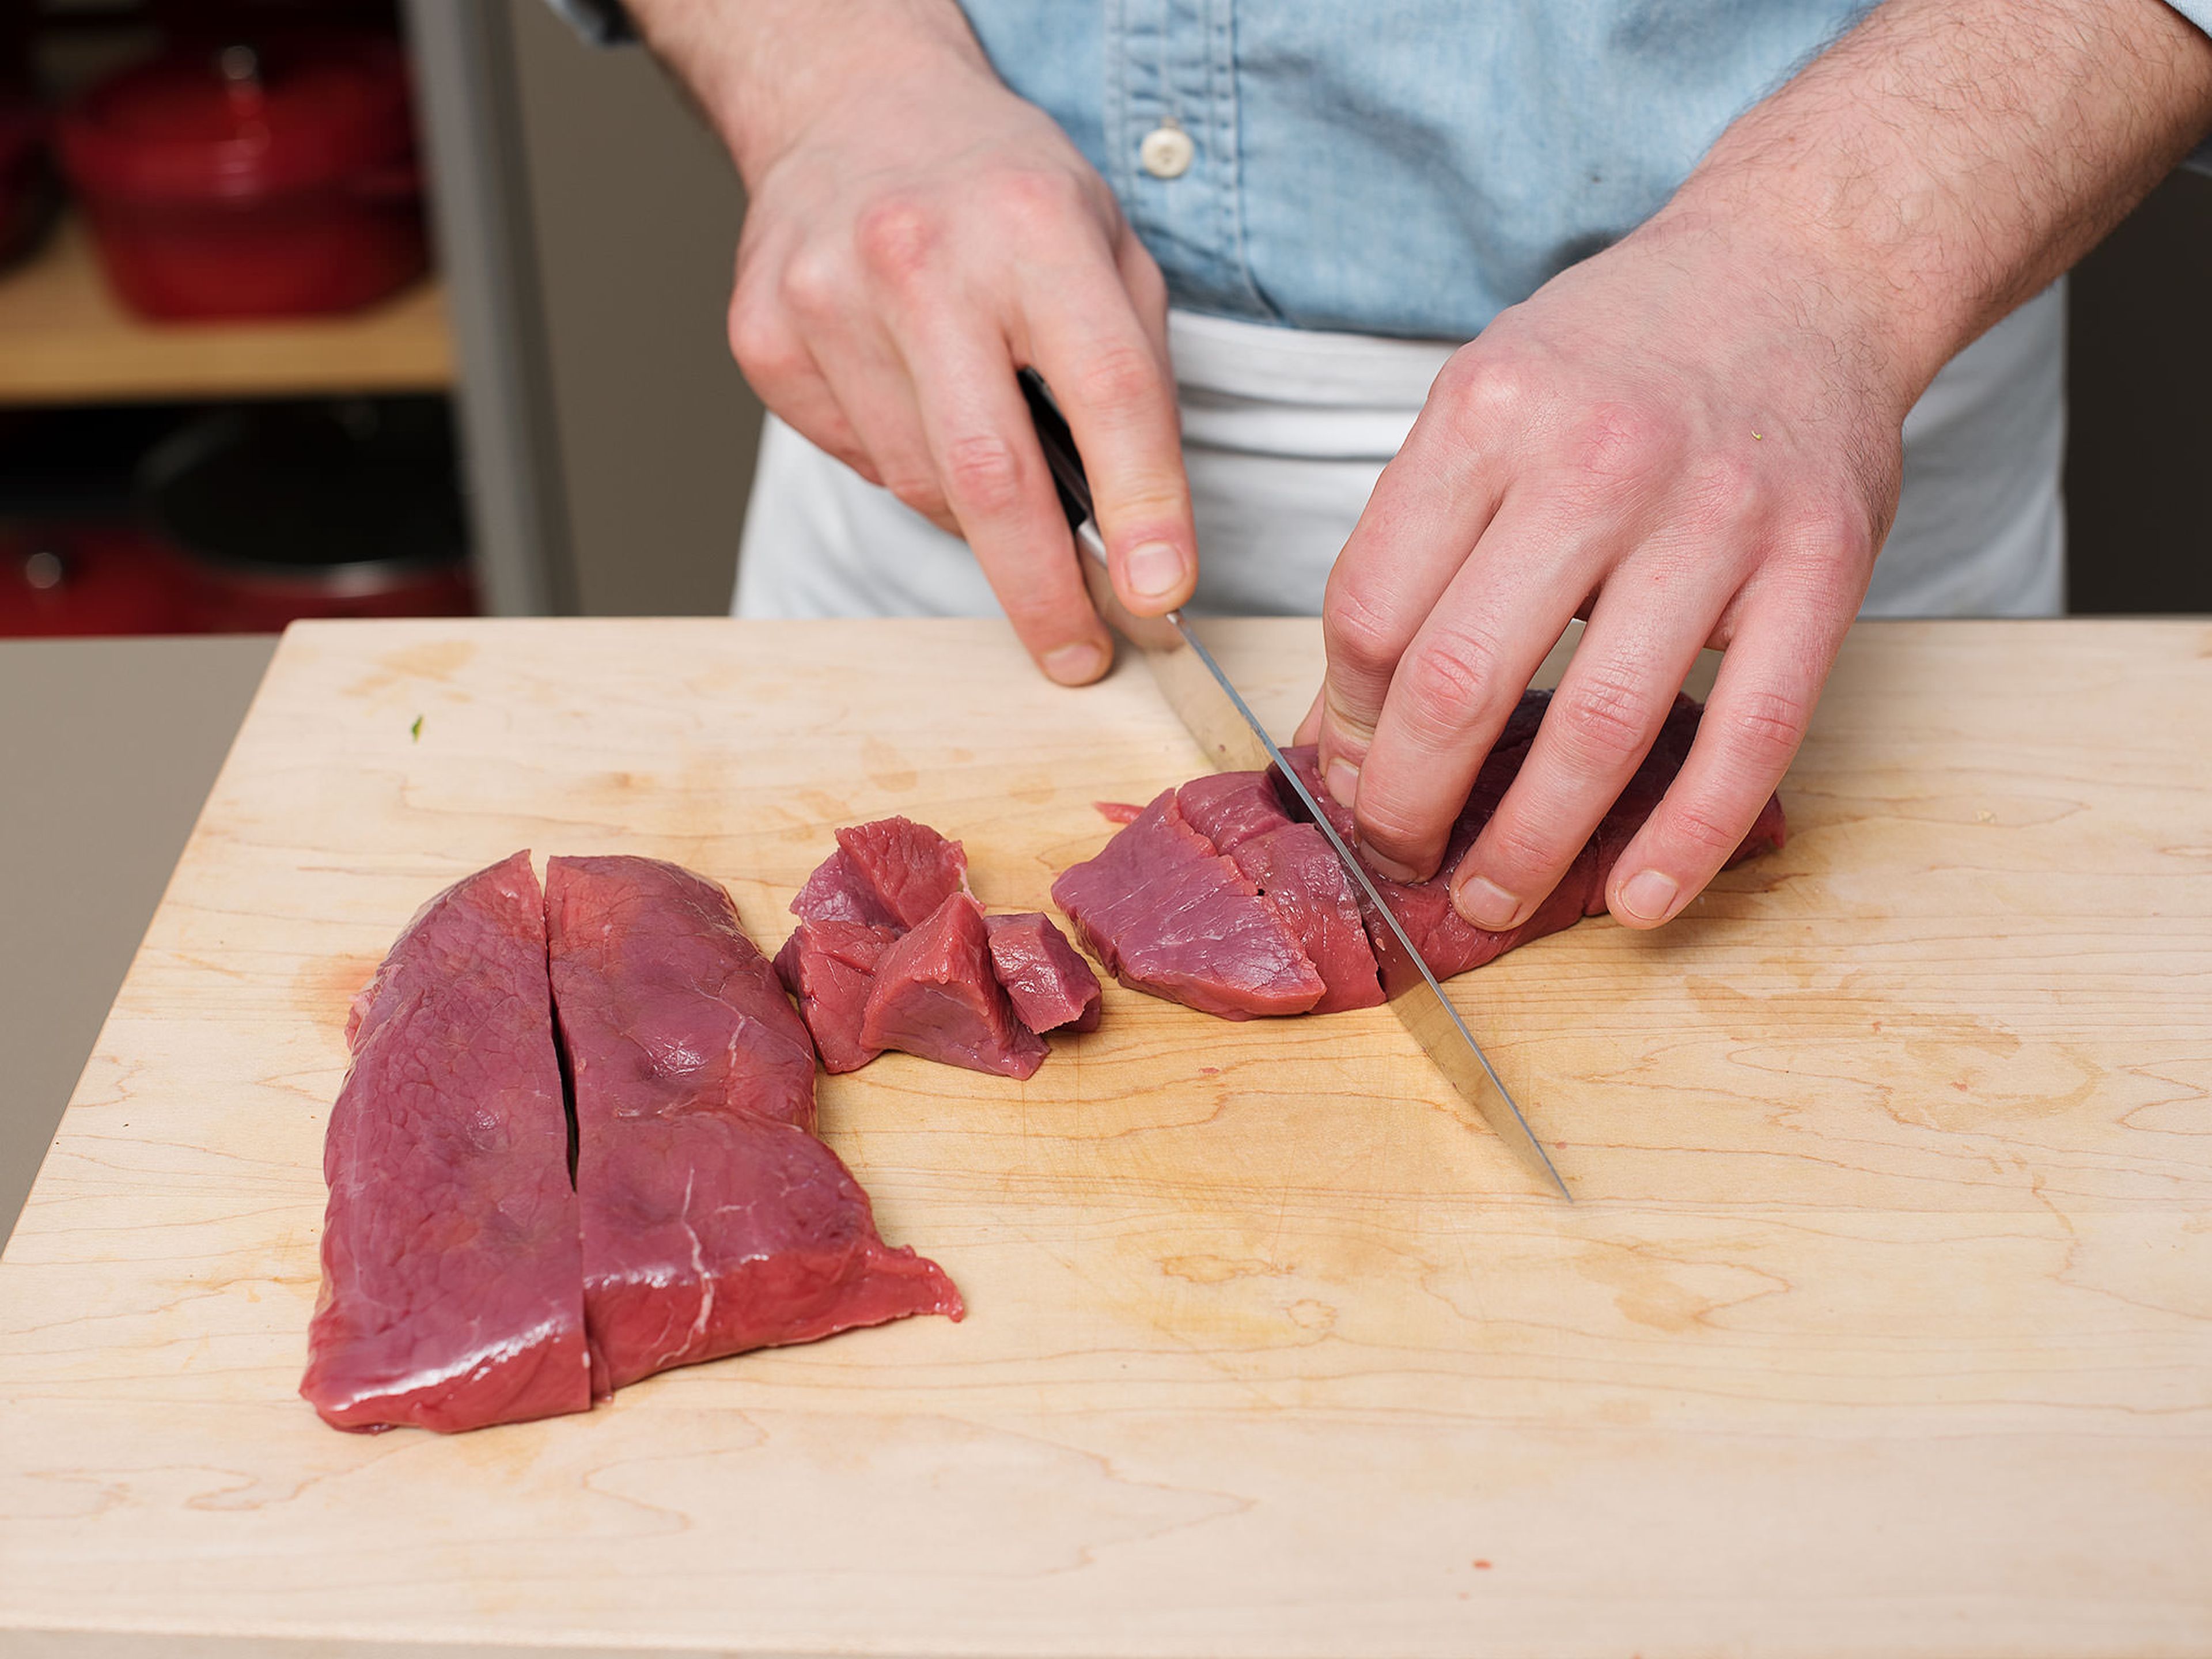 Cut chicken breast and beef into bite-sized pieces.